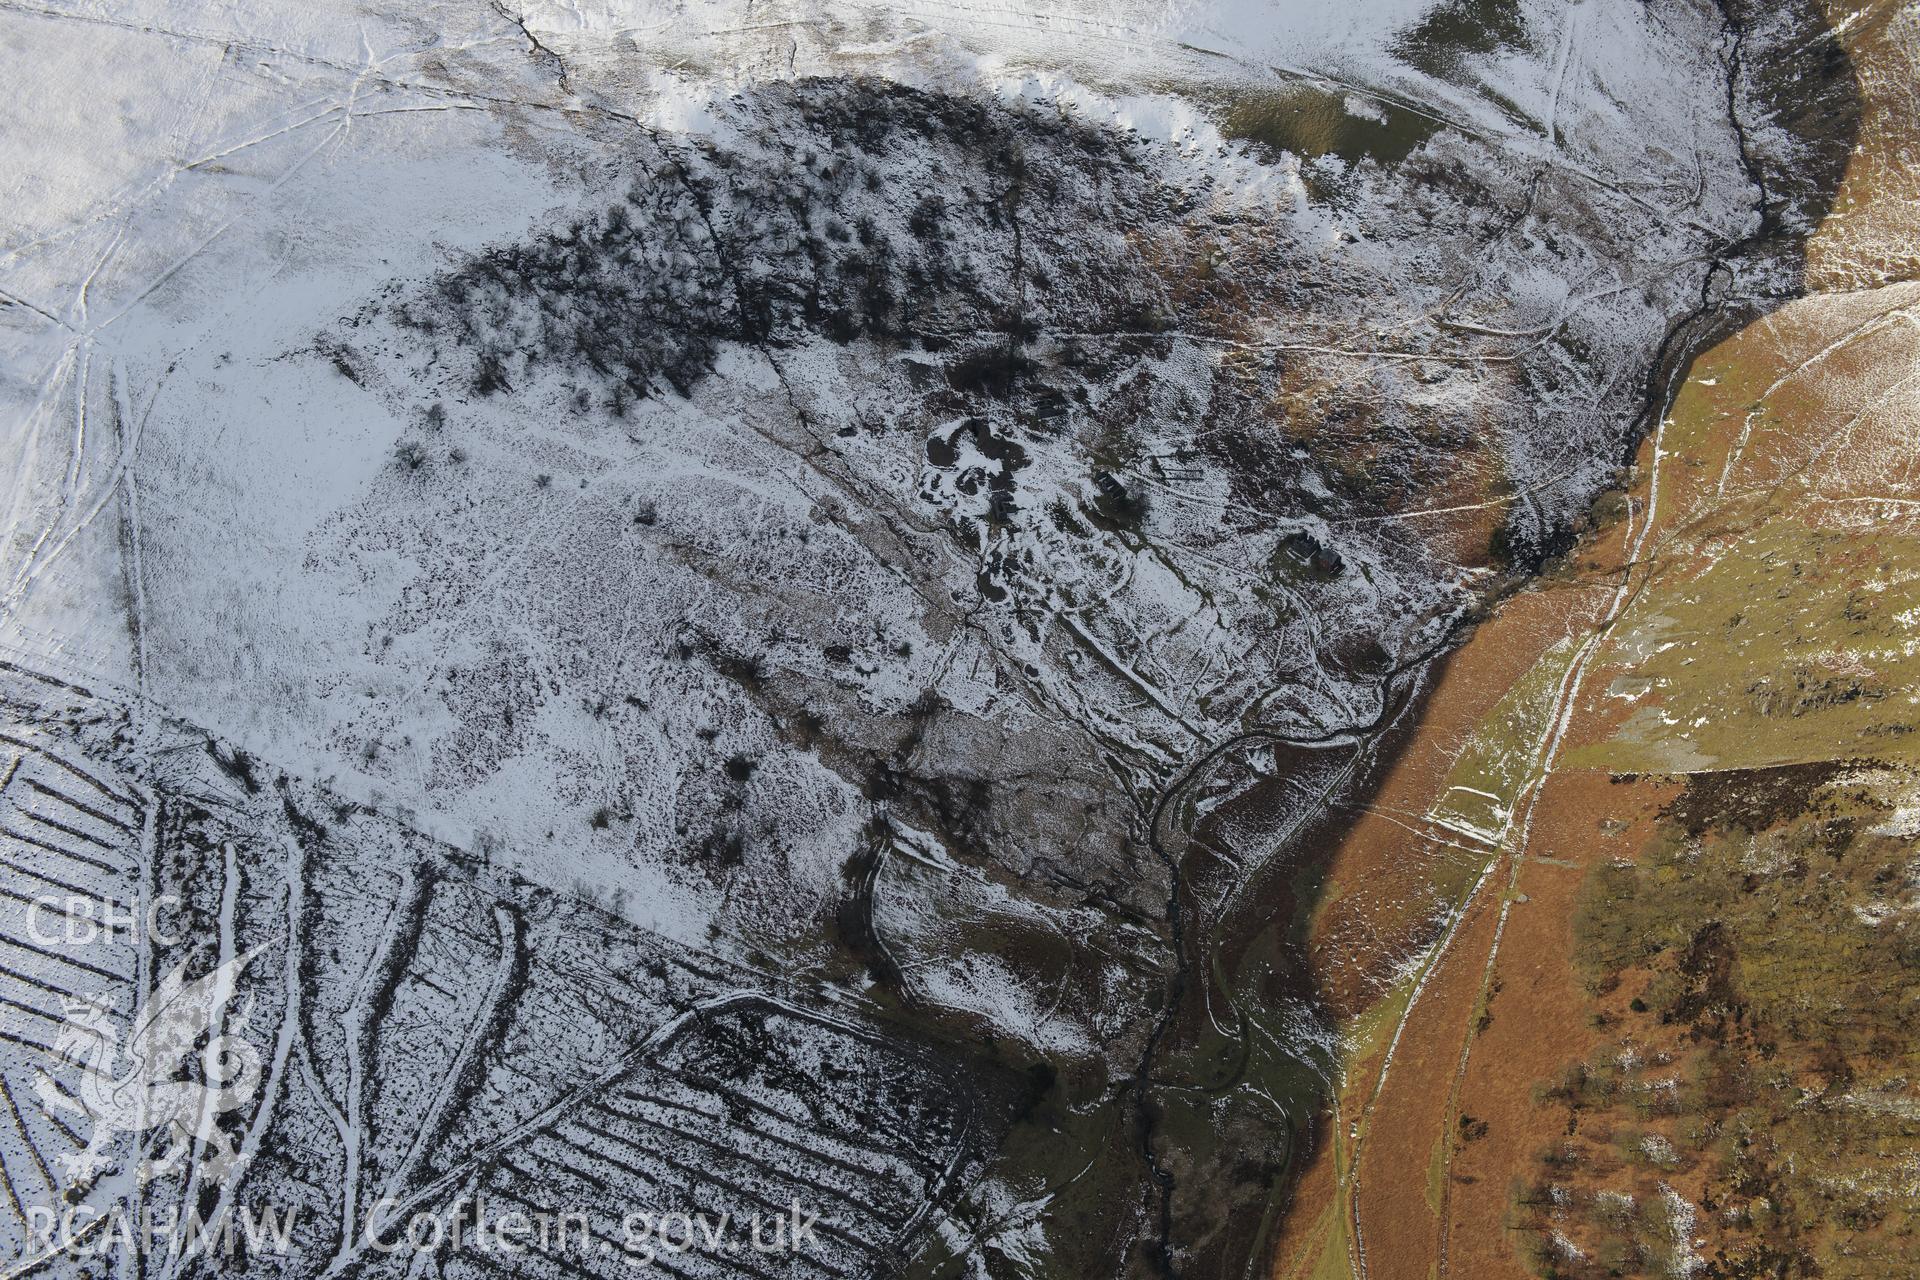 Site of Cwm Elan lead mine complex near Rhayader. Oblique aerial photograph taken during the Royal Commission's programme of archaeological aerial reconnaissance by Toby Driver on 4th February 2015.